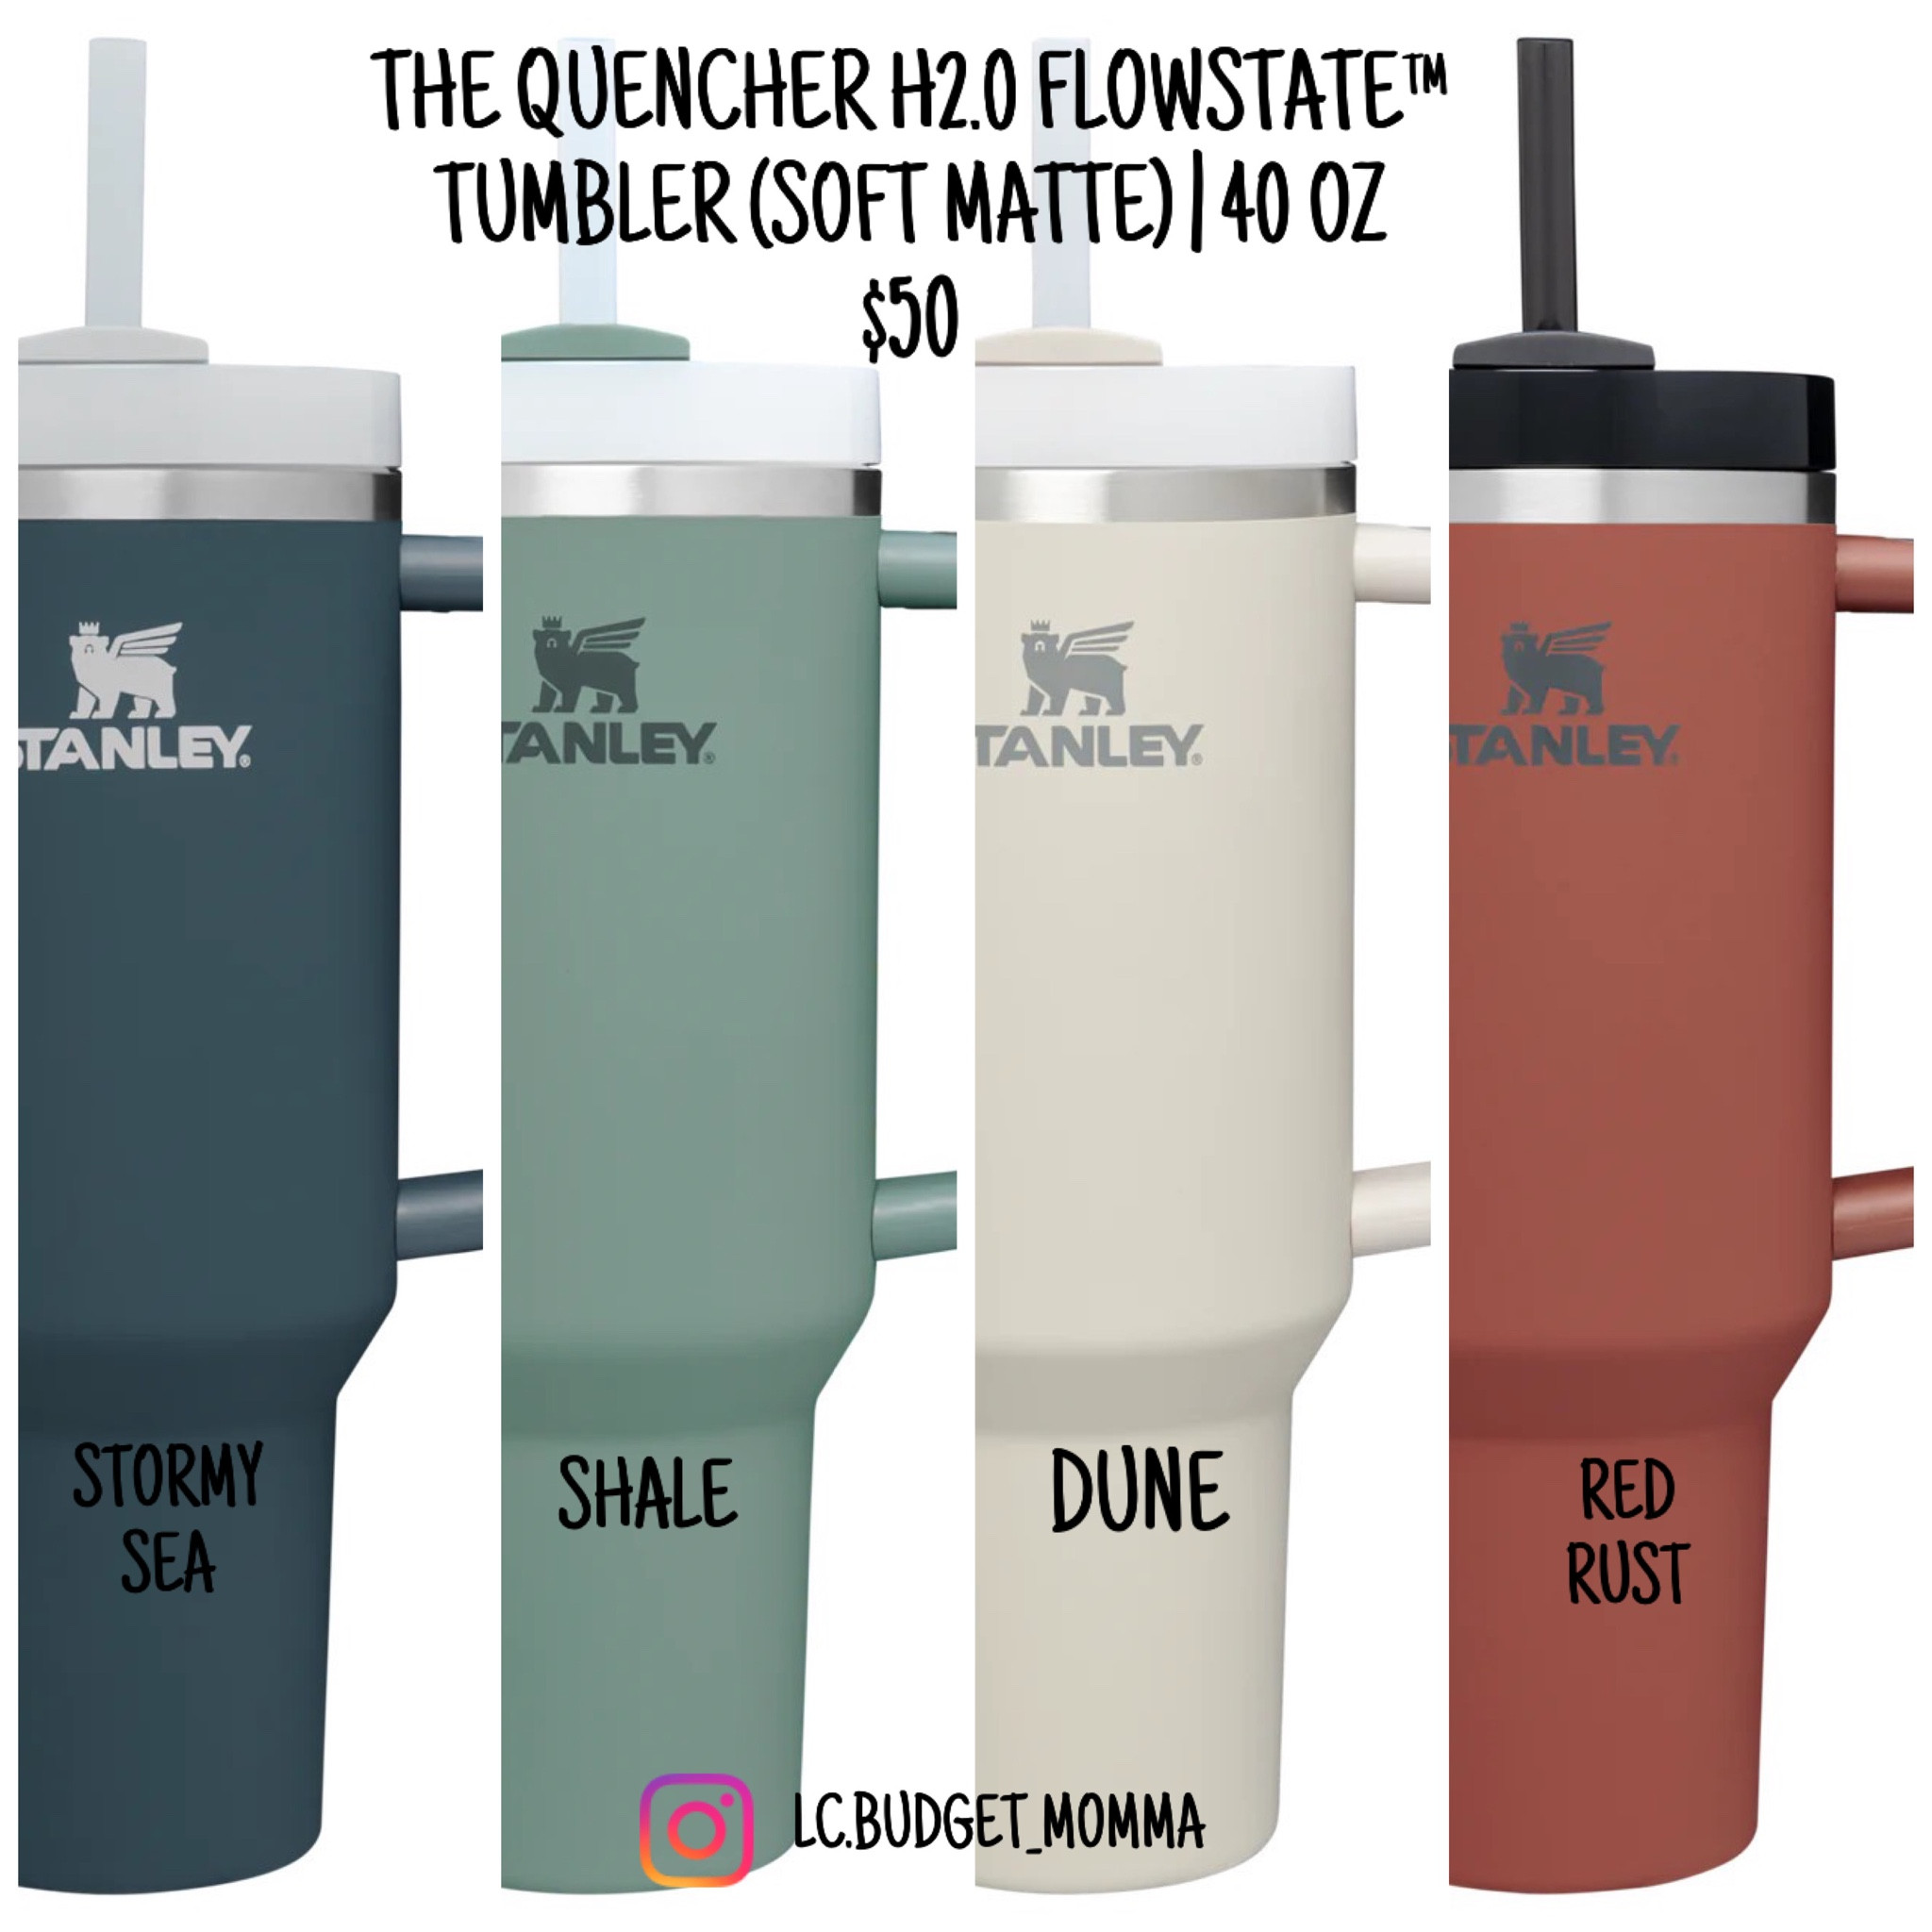 The Quencher H2.0 FlowState Tumbler (Soft Matte) - 40 oz Red Rust